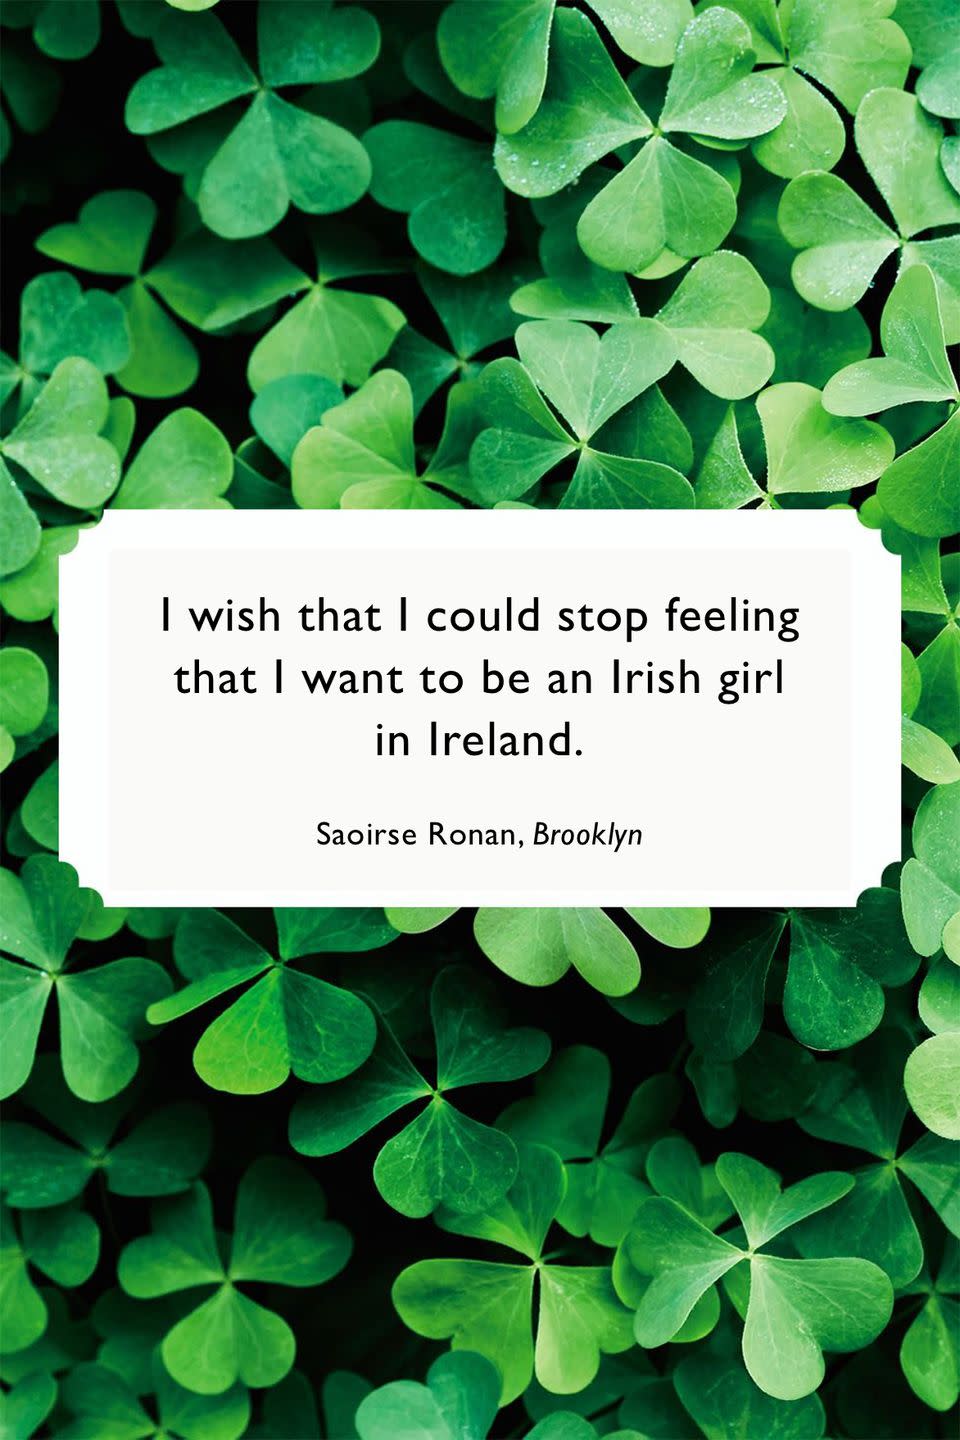 <p>"I wish that I could stop feeling that I want to be an Irish girl in Ireland."</p>